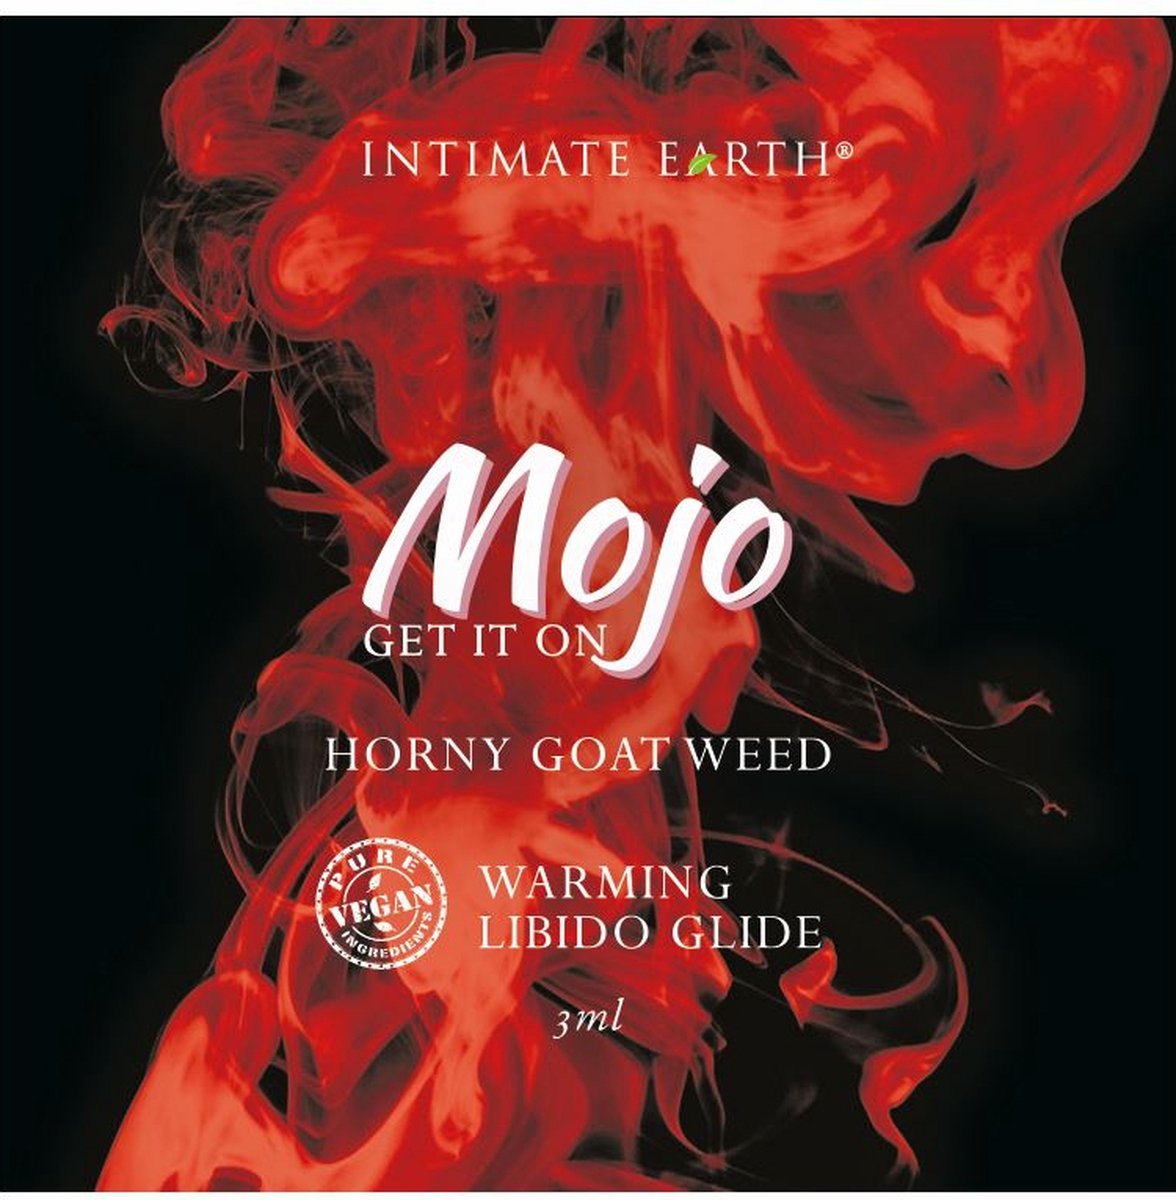 Intimate Earth - Mojo Horny Goat Weed Libido Warming Glide 3 ml Foil